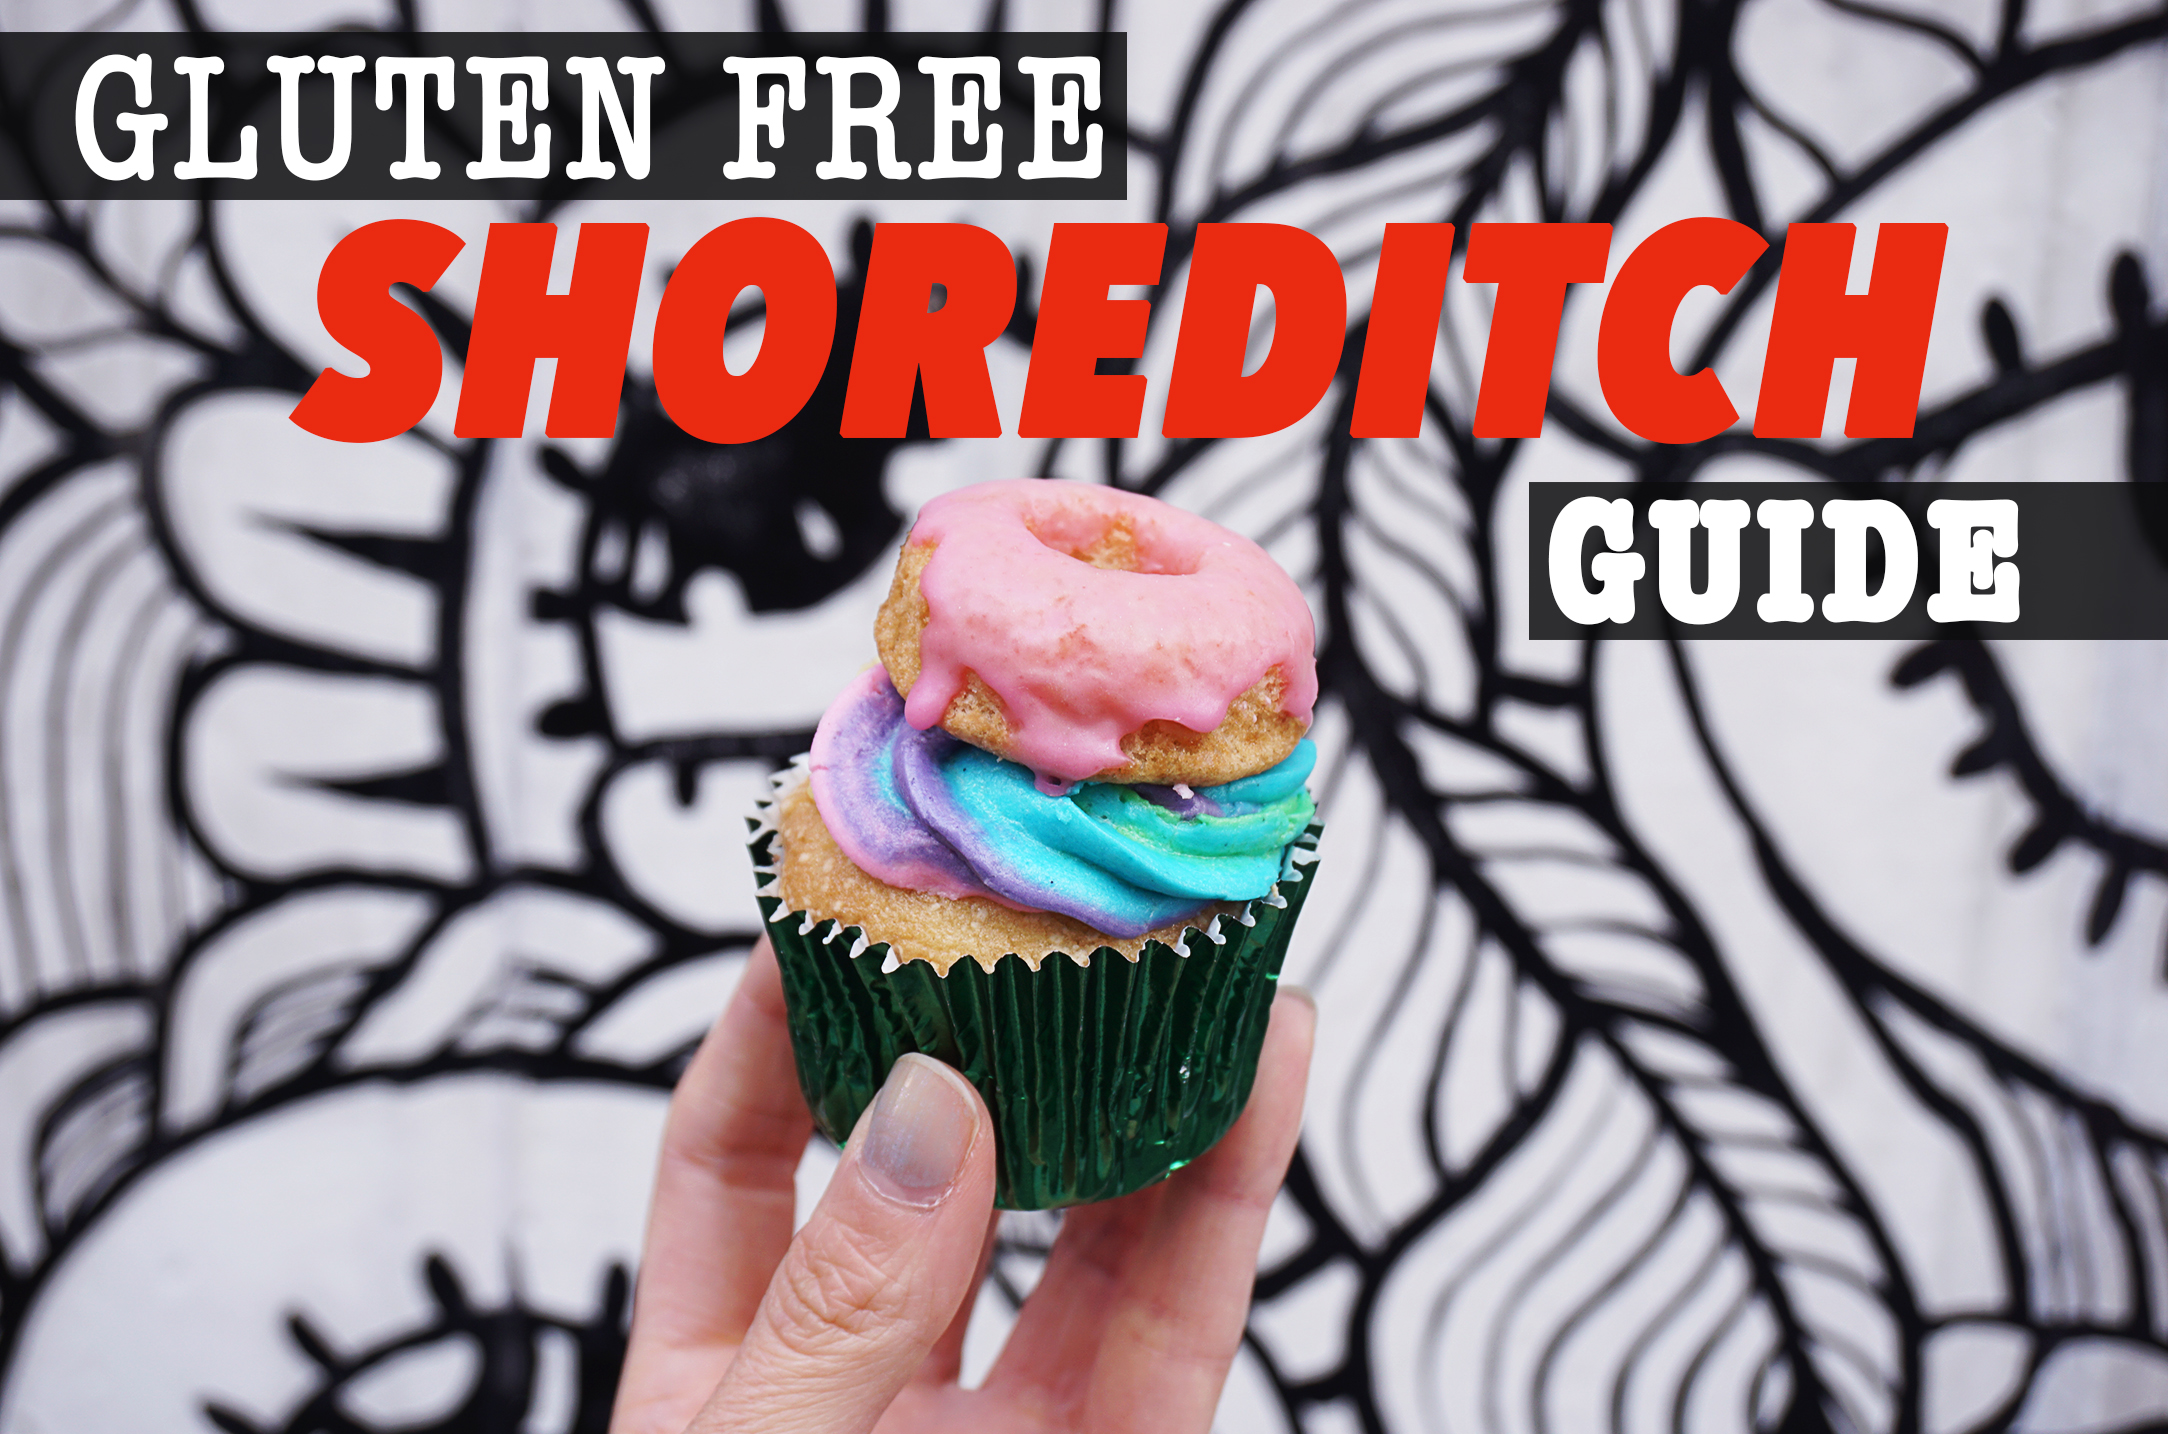 Gluten free cupcake with colourful icing and a mini doughnut on top from Vida Bakery in Shoreditch | Gluten free Shoreditch guide | Gluten free London | Hoxton | Liverpool Street | Spitalfield | Old Street | East London | a gluten free Shoredtich guide by Kimi Eats Gluten Free